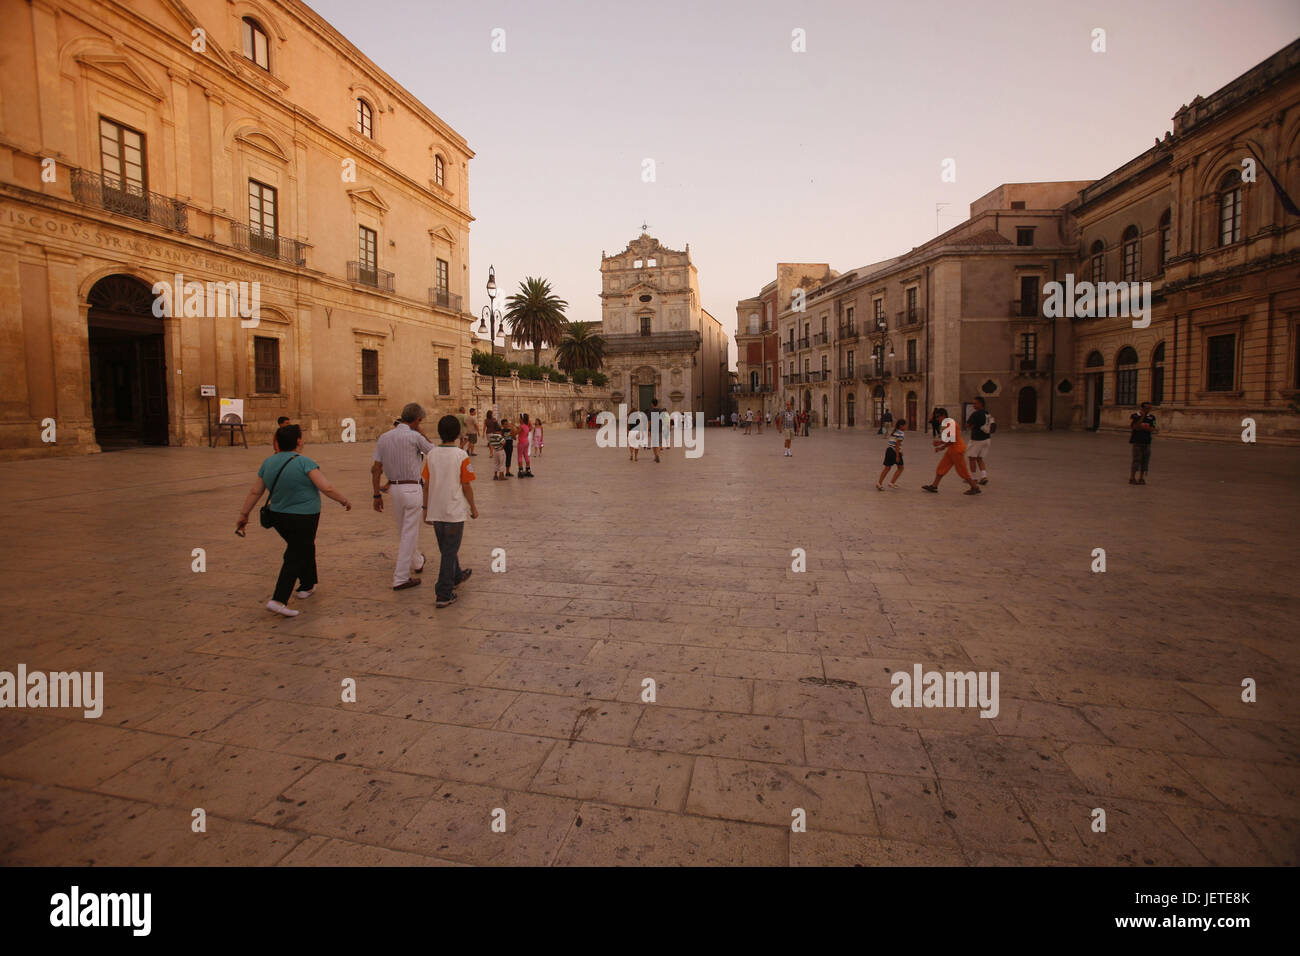 Italy, Sicily, island Ortygia, Syracuse, Old Town, Piazza Duoma, church Santa Lucia alla Badia, tourists, Southern Europe, Siracusa, church, structure, architecture, place of interest, square, cathedral square, person, destination, tourism, Stock Photo